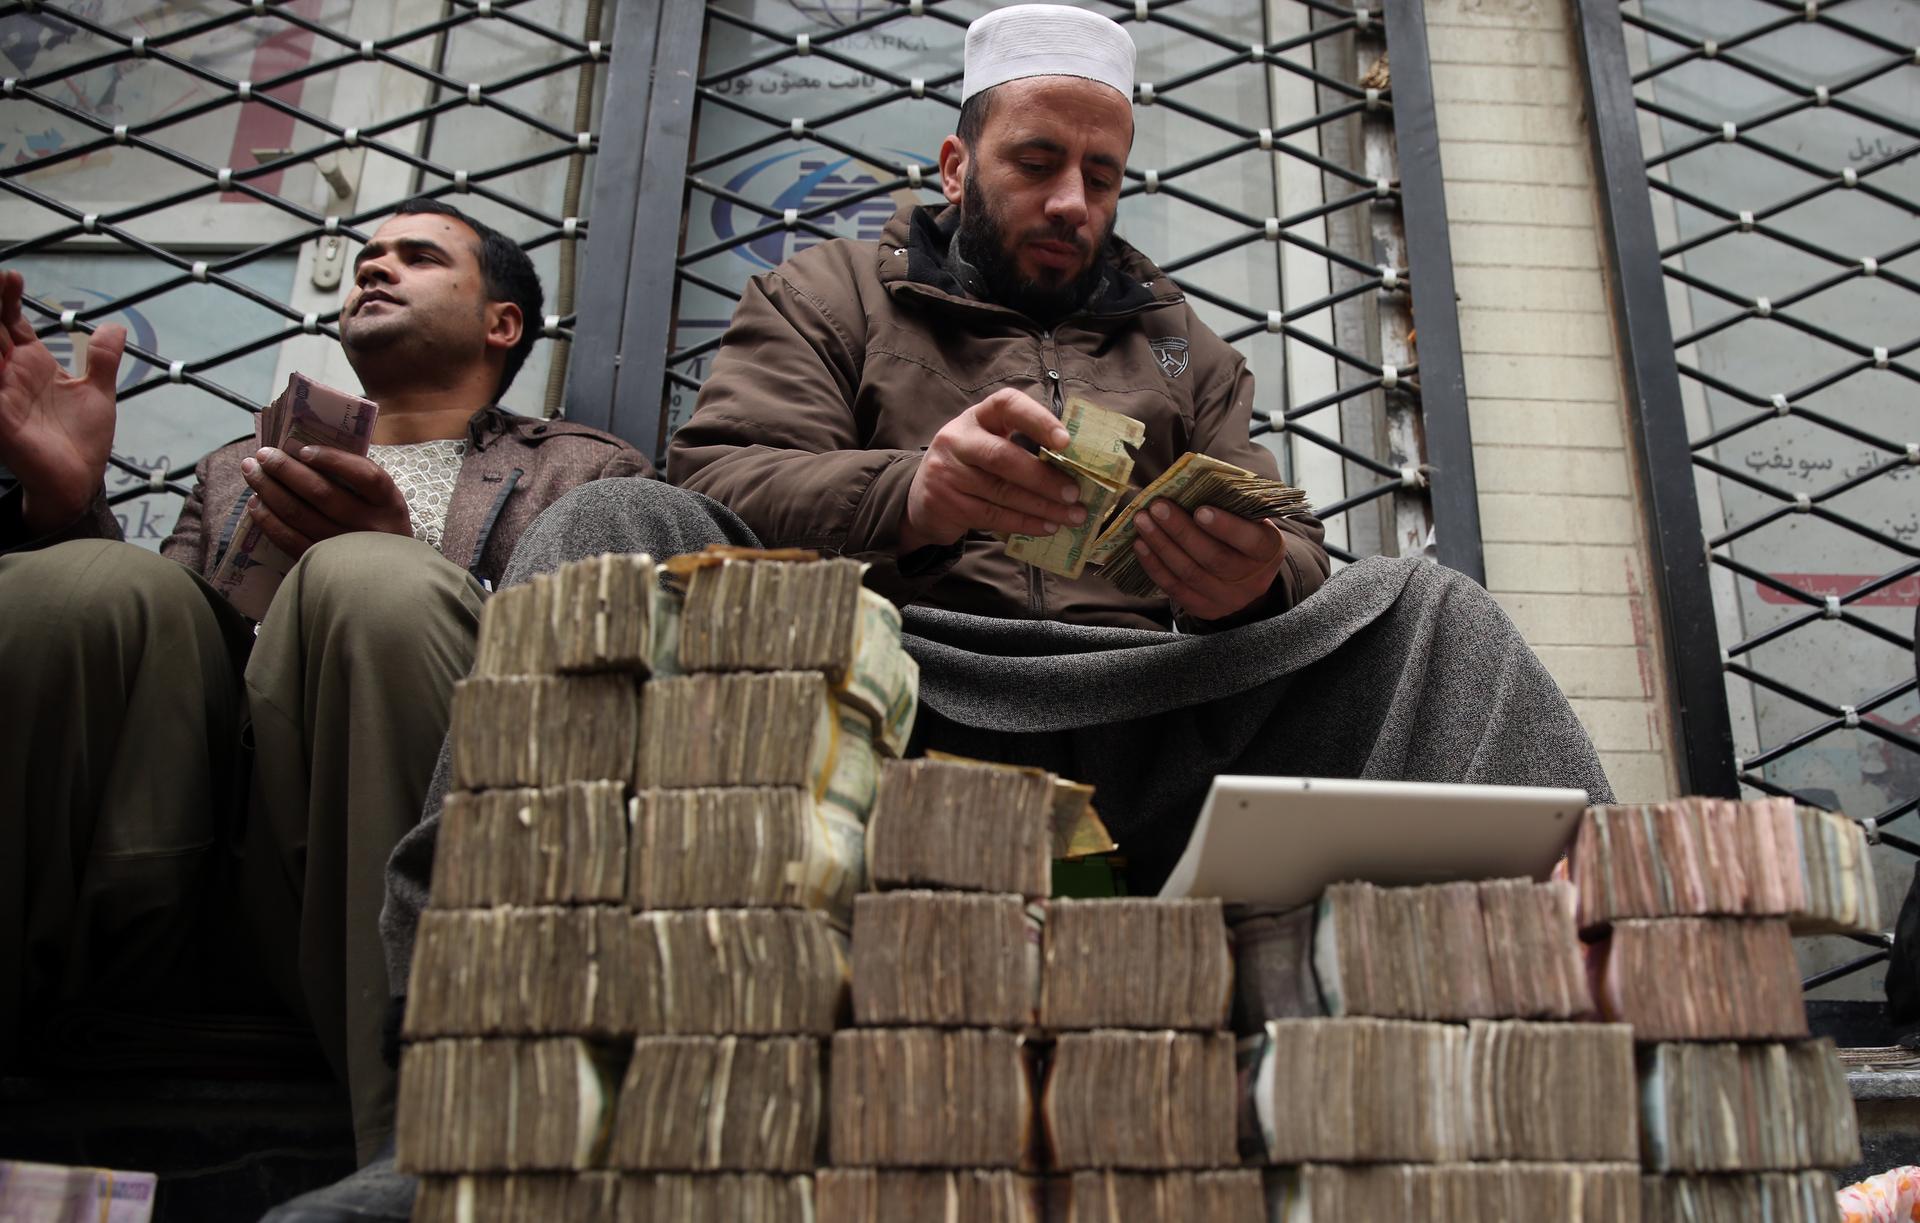 Afghanistan relies on informal money changers more than banks. 